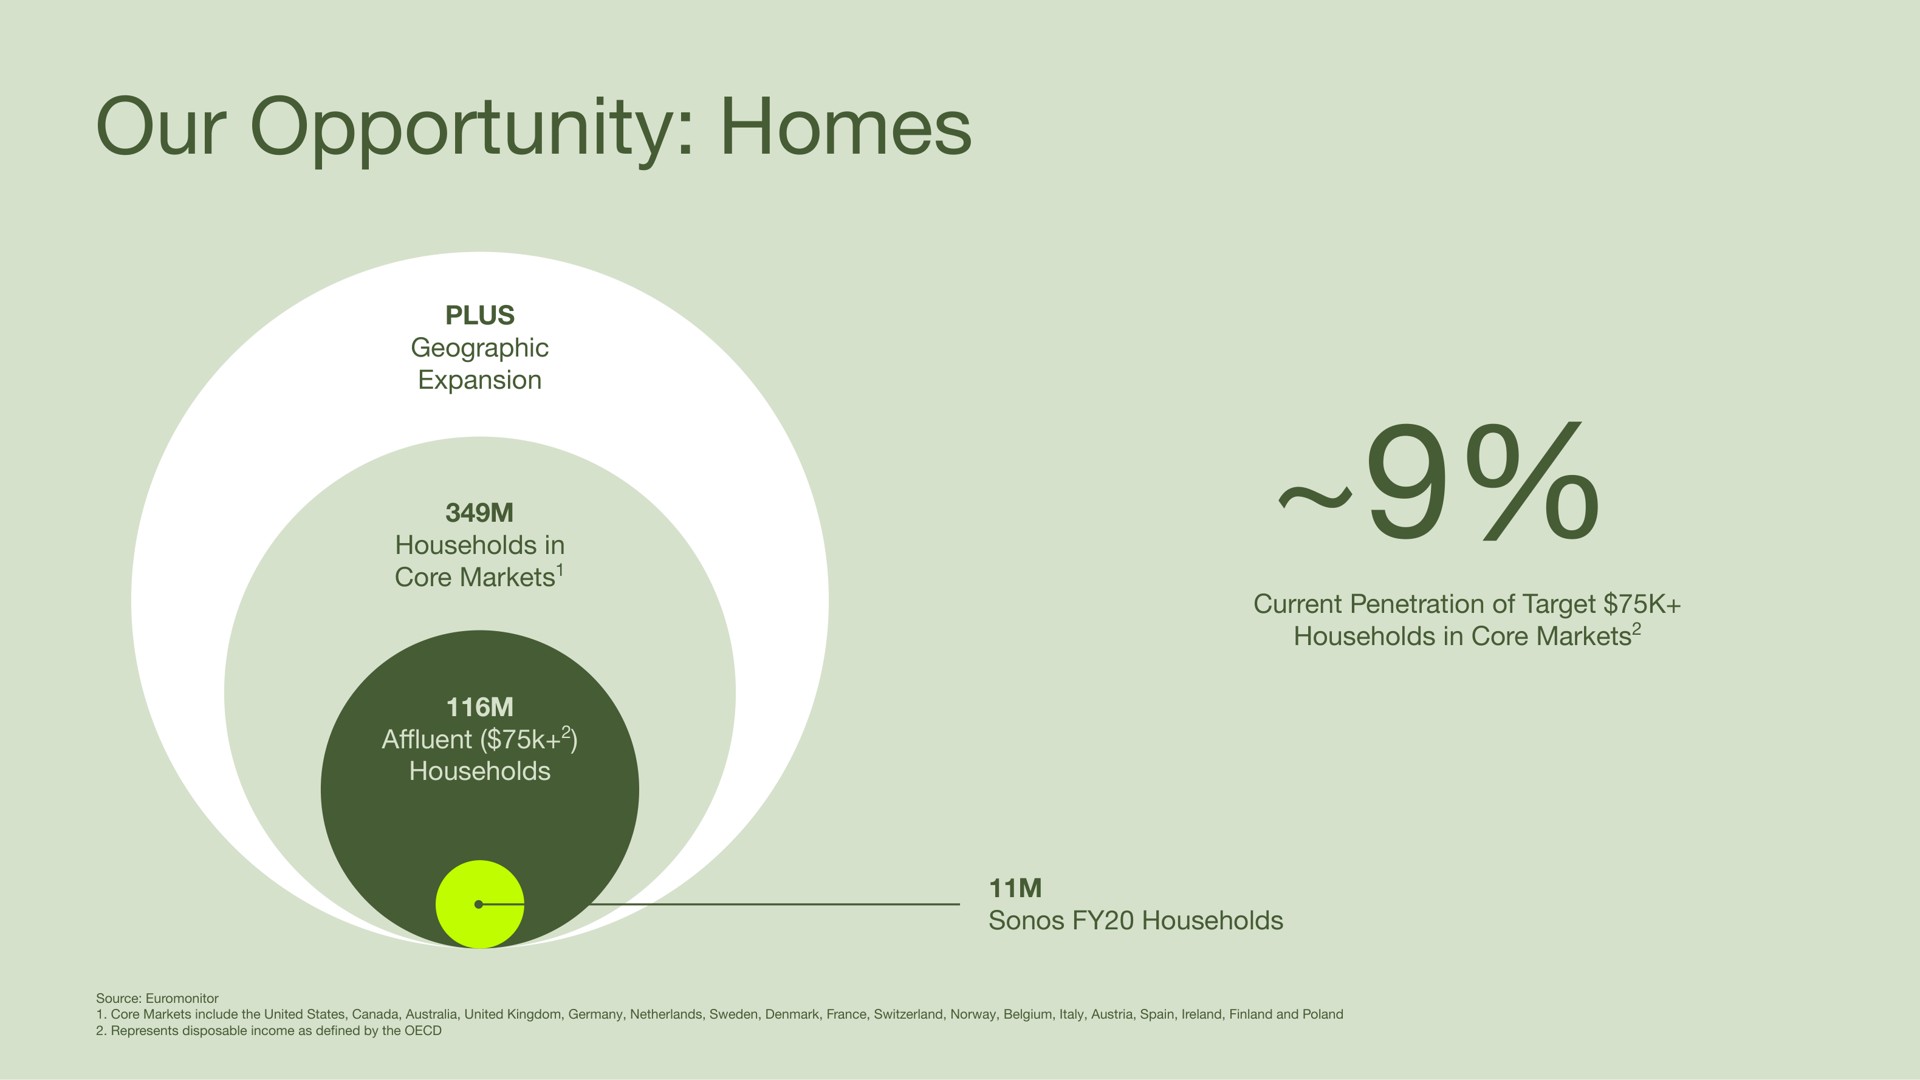 our opportunity homes plus geographic expansion households in core markets a households current penetration of target households in core markets source core markets include the united states canada united kingdom finland and represents disposable income as by the households | Sonos